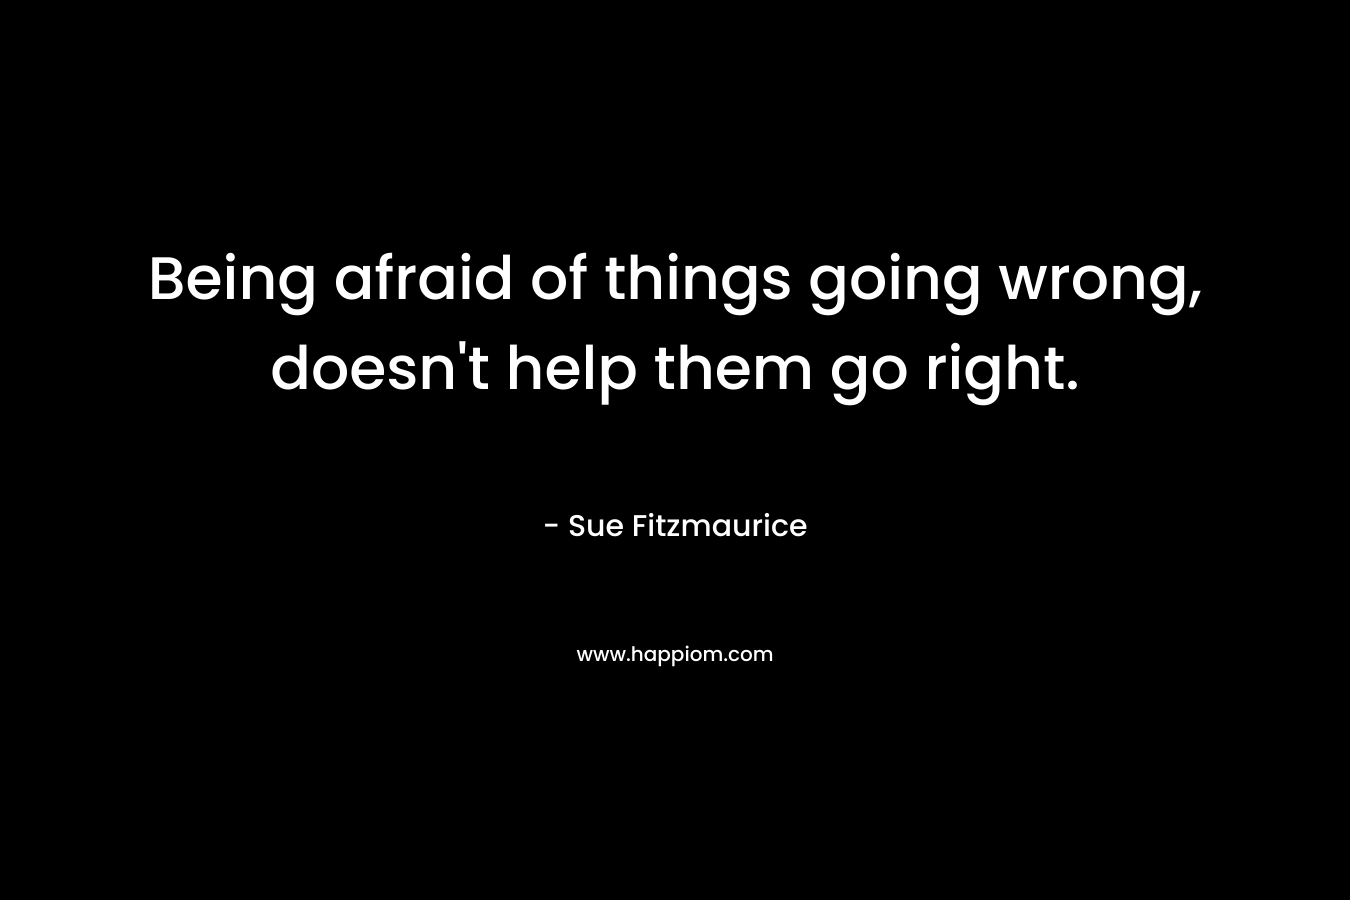 Being afraid of things going wrong, doesn't help them go right.